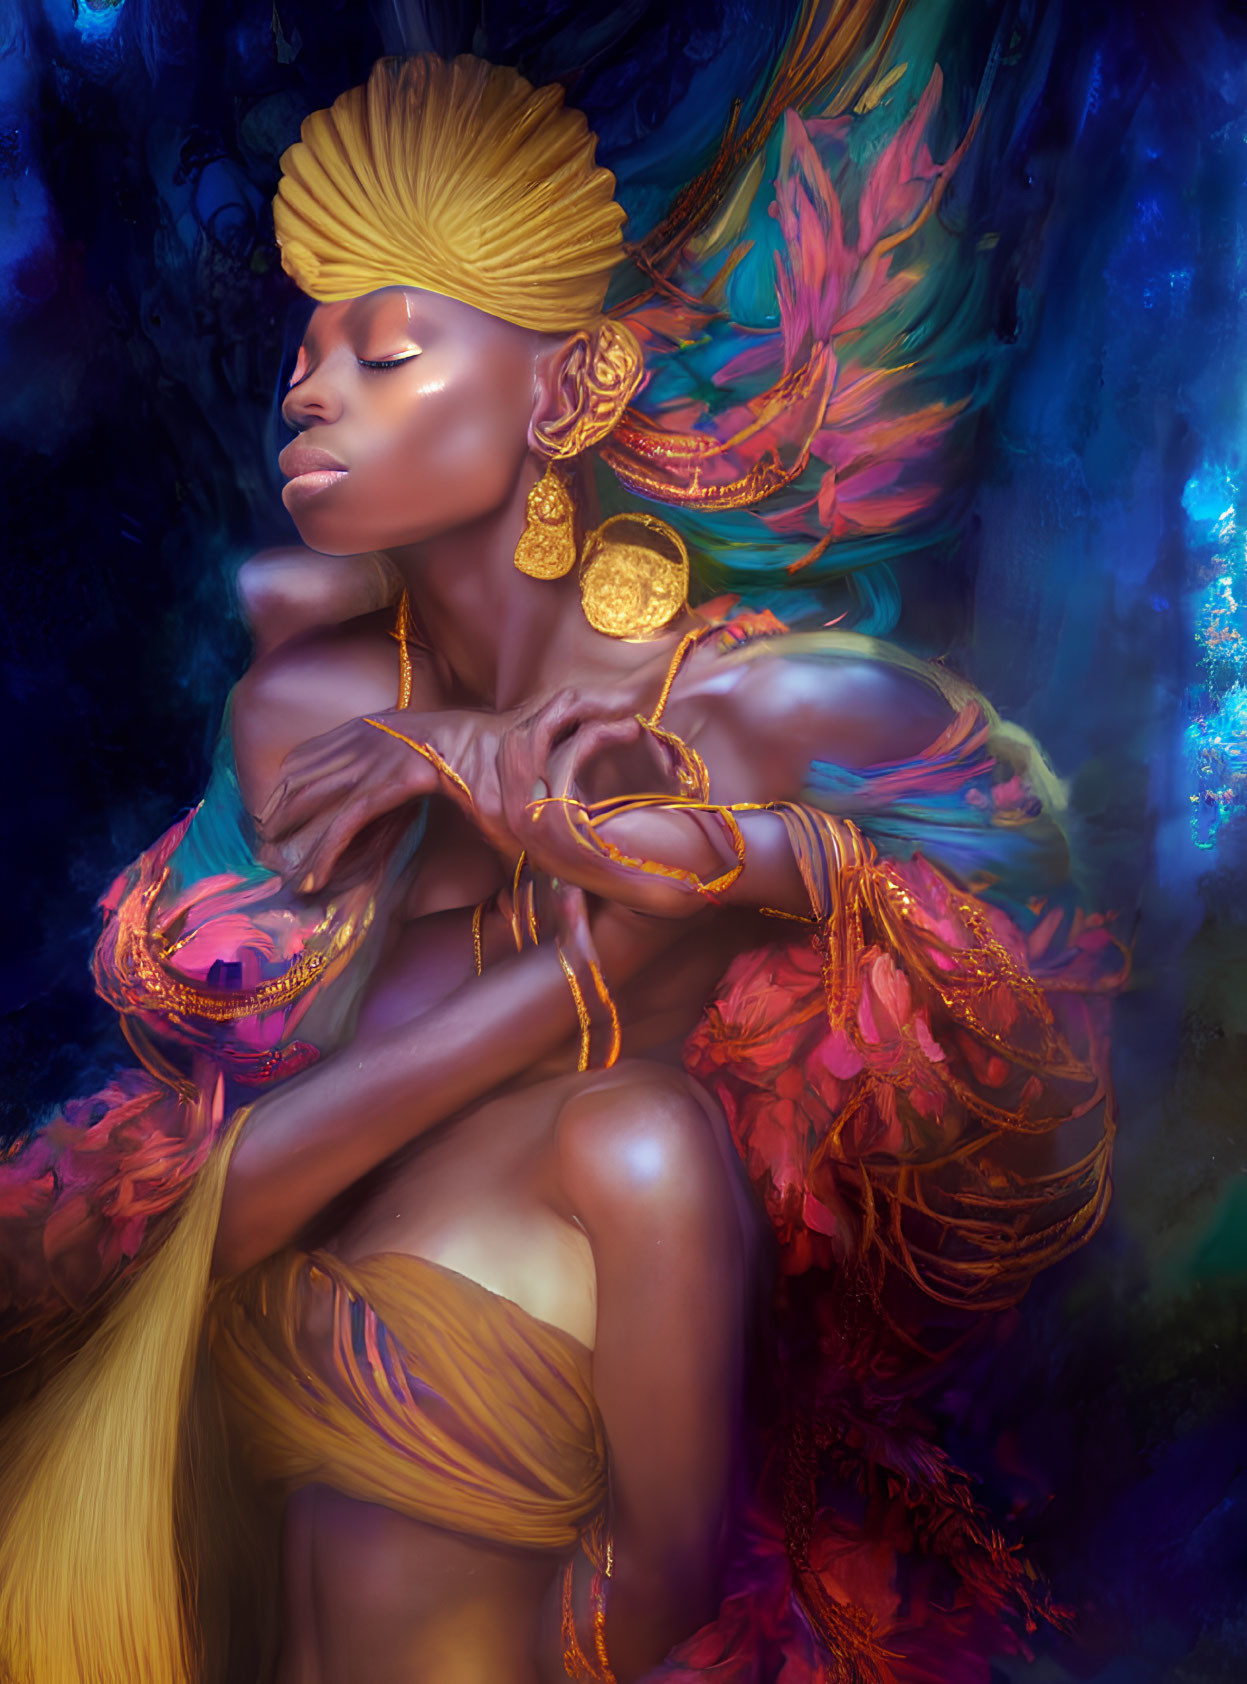 Surreal artwork depicting a woman with golden skin and hair, adorned with pink feathers and gold jewelry